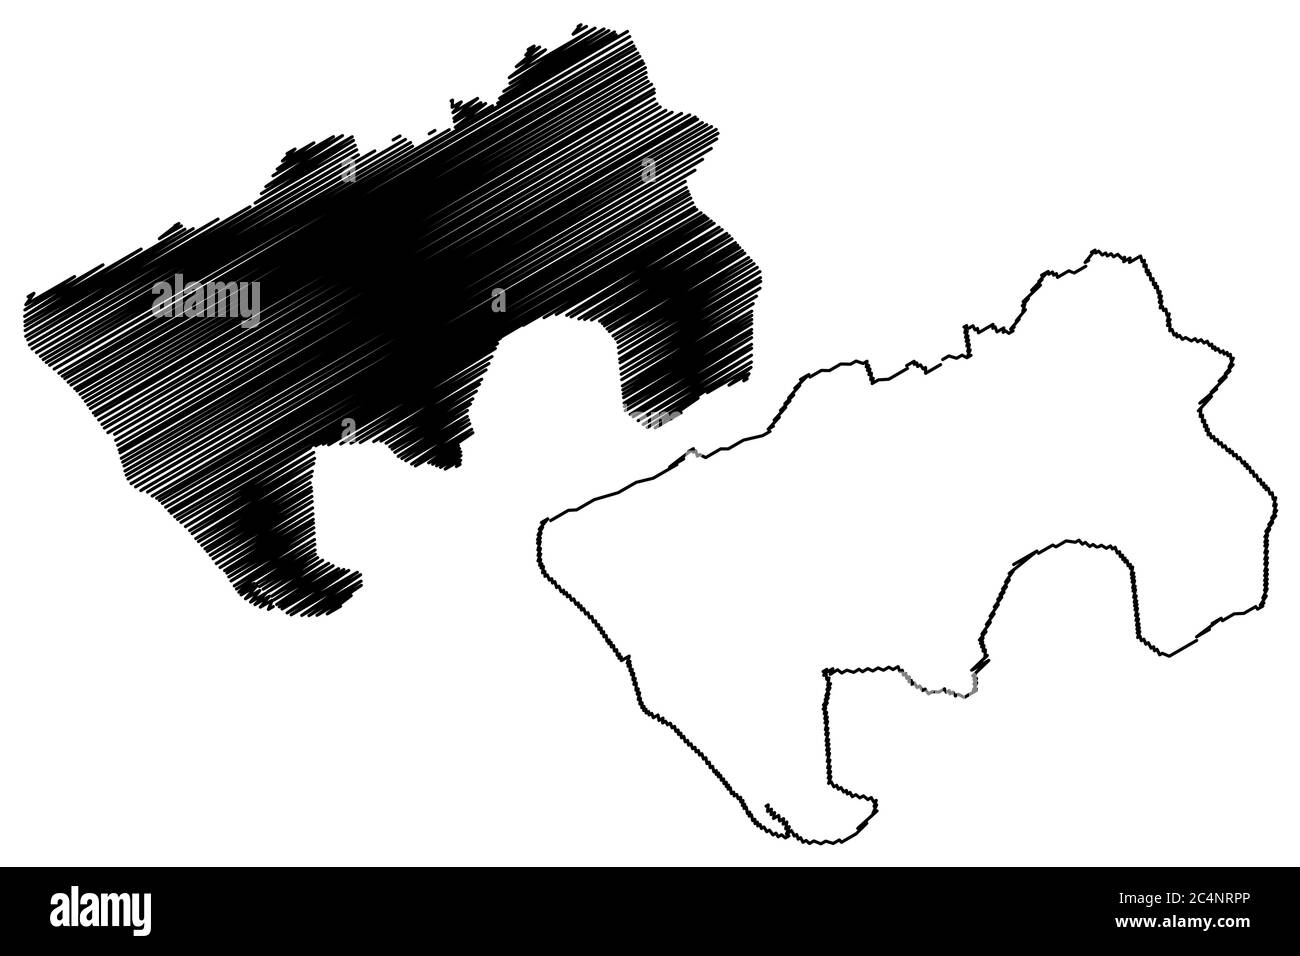 Maharashtra Map Black Outline With Shadow On White Background Stock  Illustration - Download Image Now - iStock